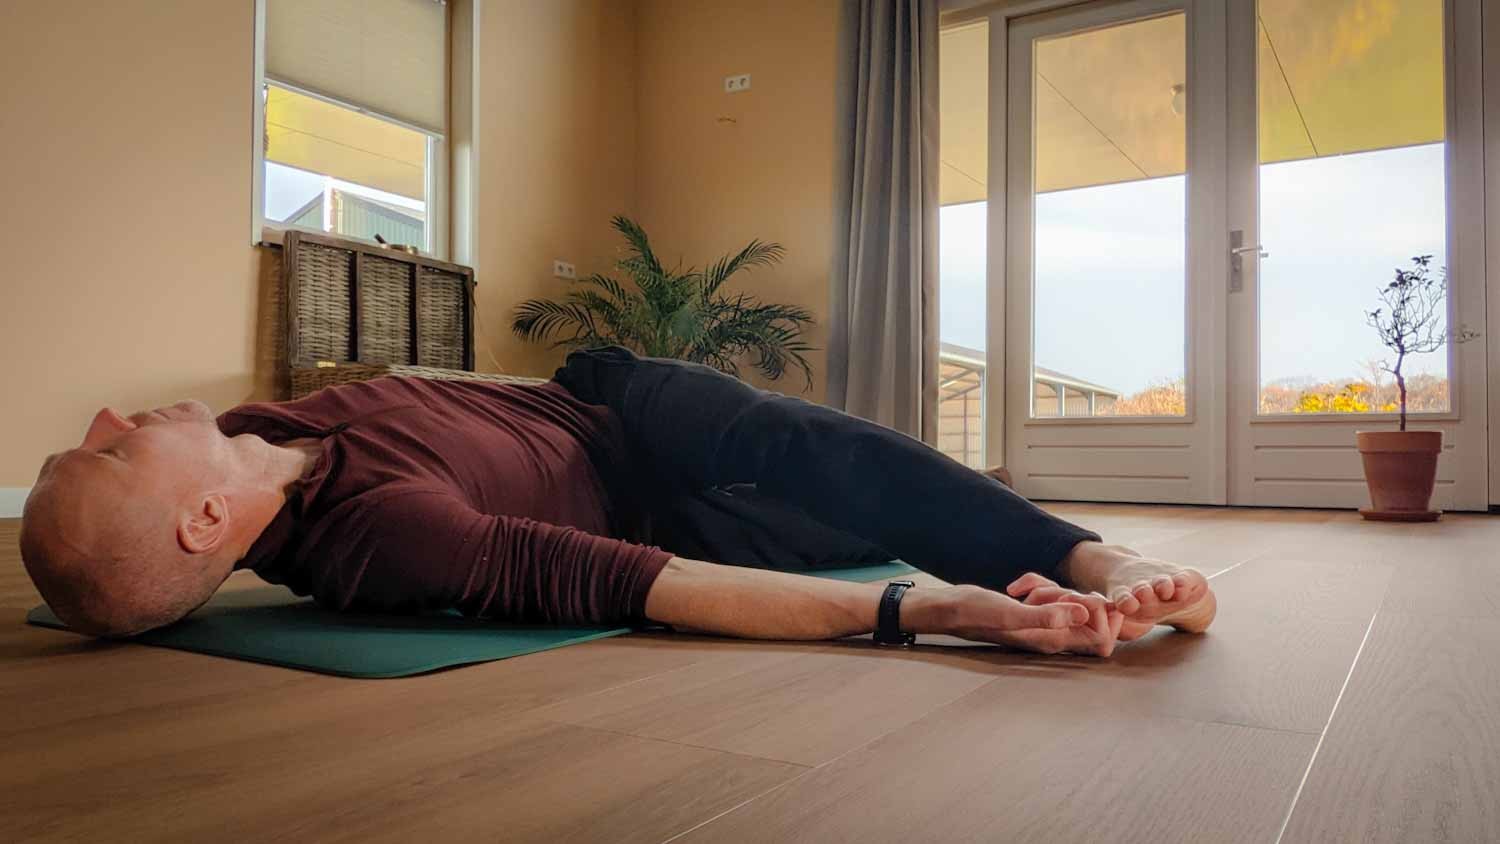 I got a quick Yin yoga practice in. Quick, because we have a day of travelling. In the Netherlands that means getting to the airport early, because there is a lack of security staff.